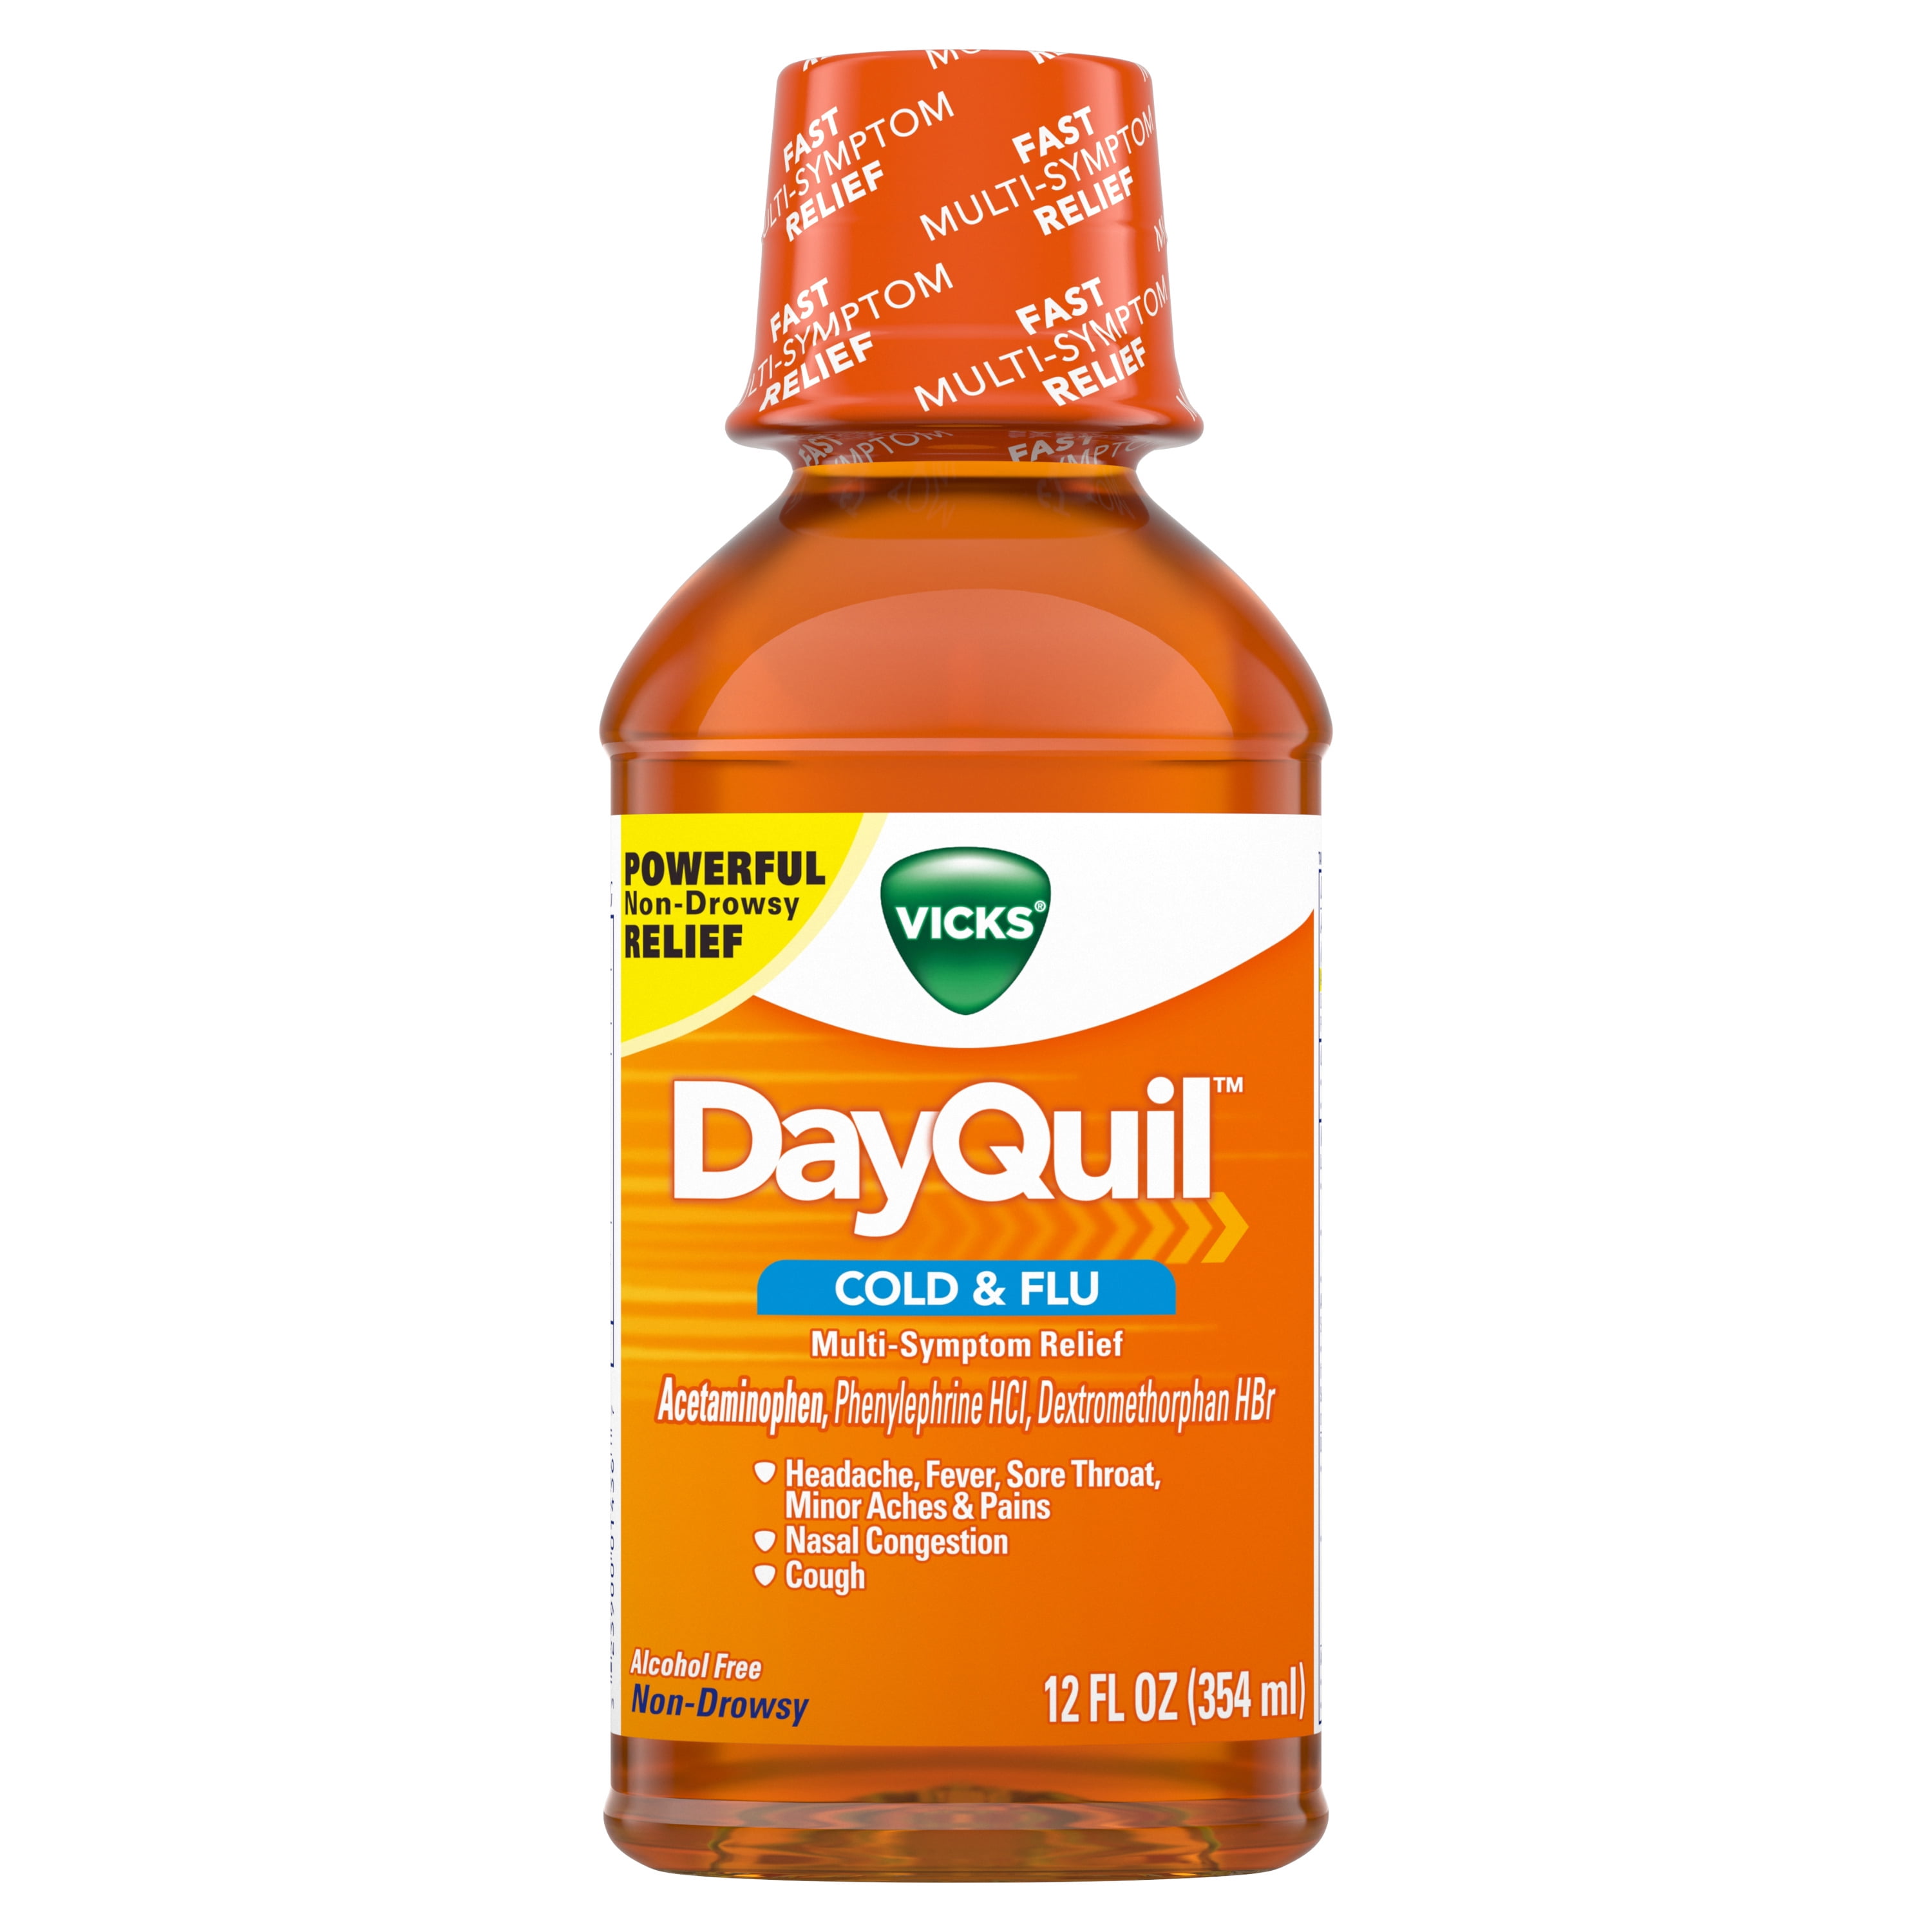 vicks-dayquil-non-drowsy-daytime-cold-flu-medicine-relieves-aches